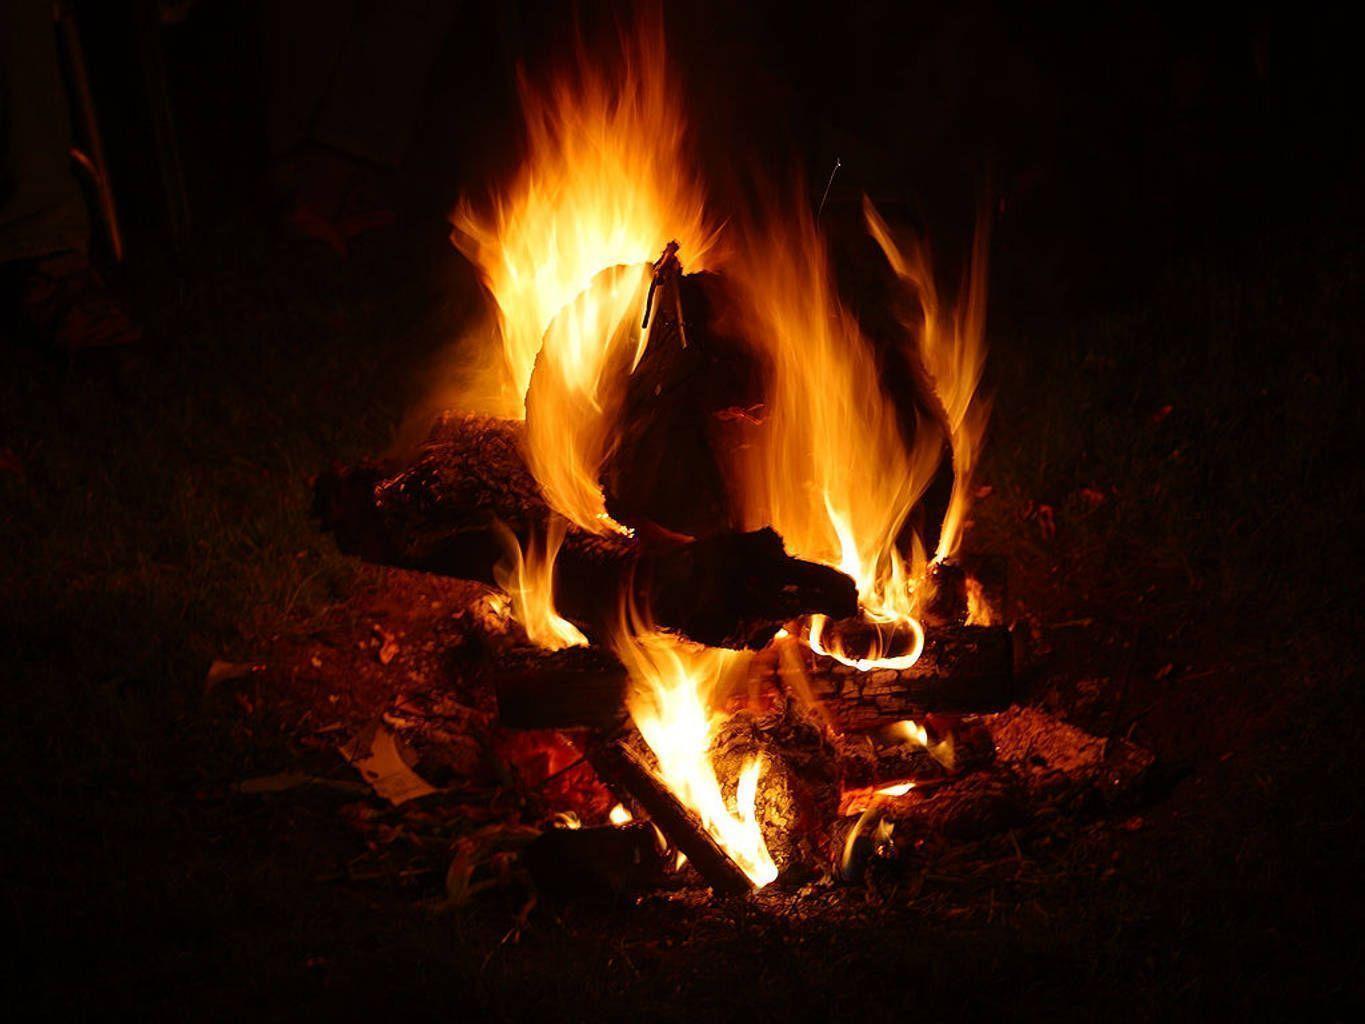 Free Campfire Background. Twitter Background. Wallpaper Image